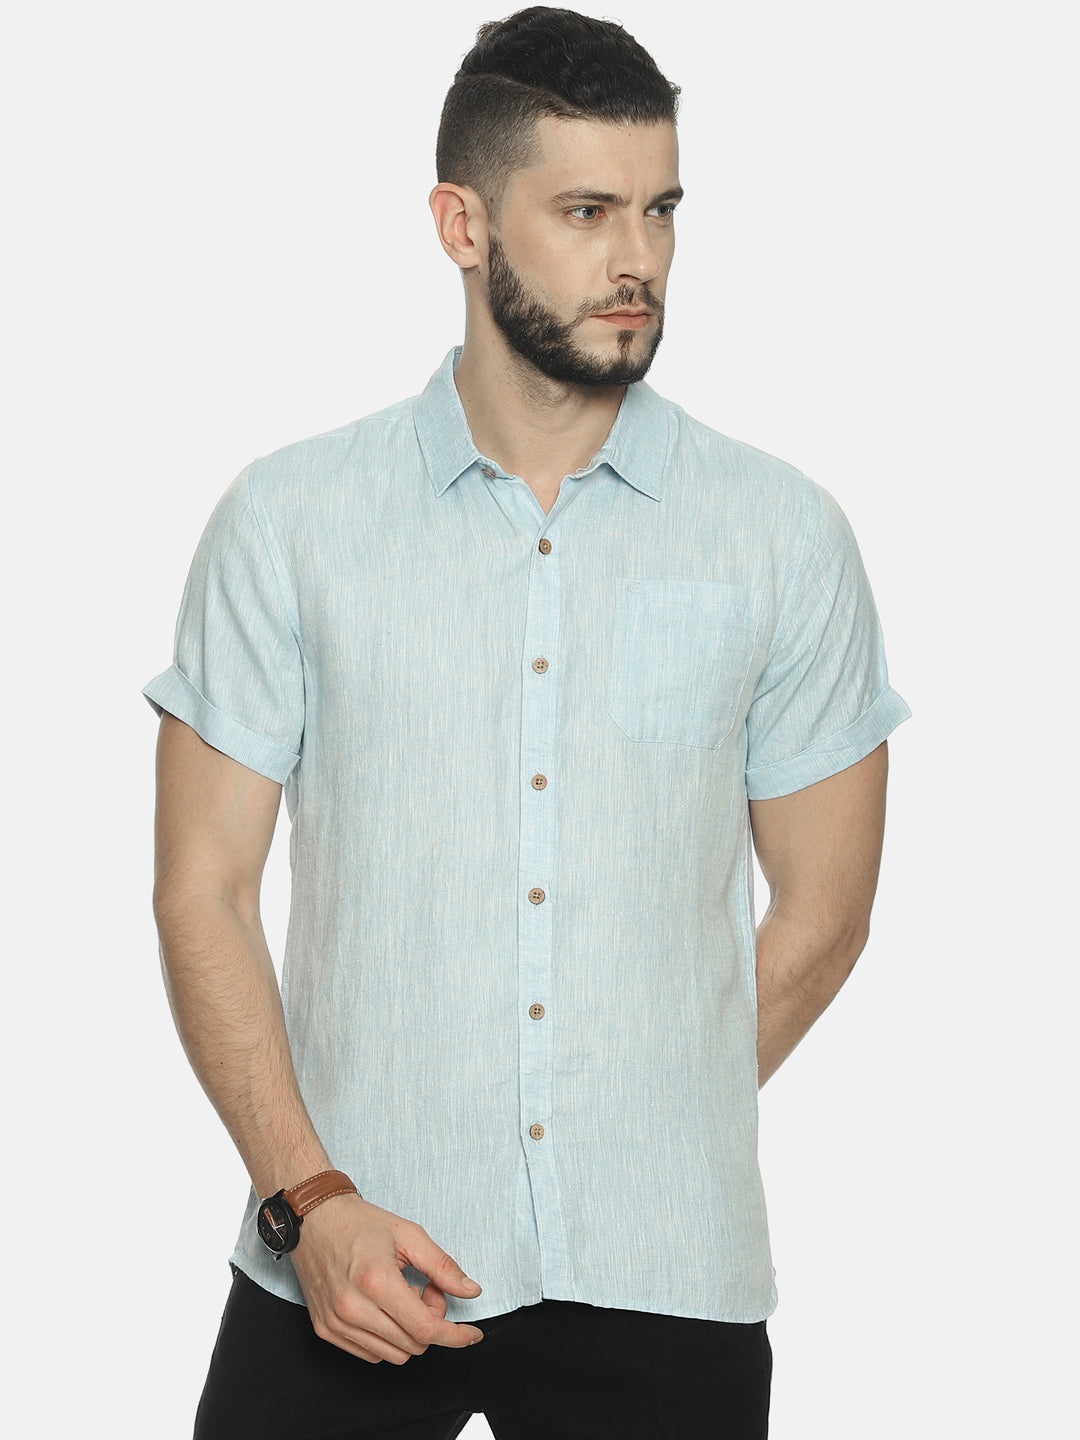 Shop Stylish Sky Blue Shirts for Men | Cool and Versatile